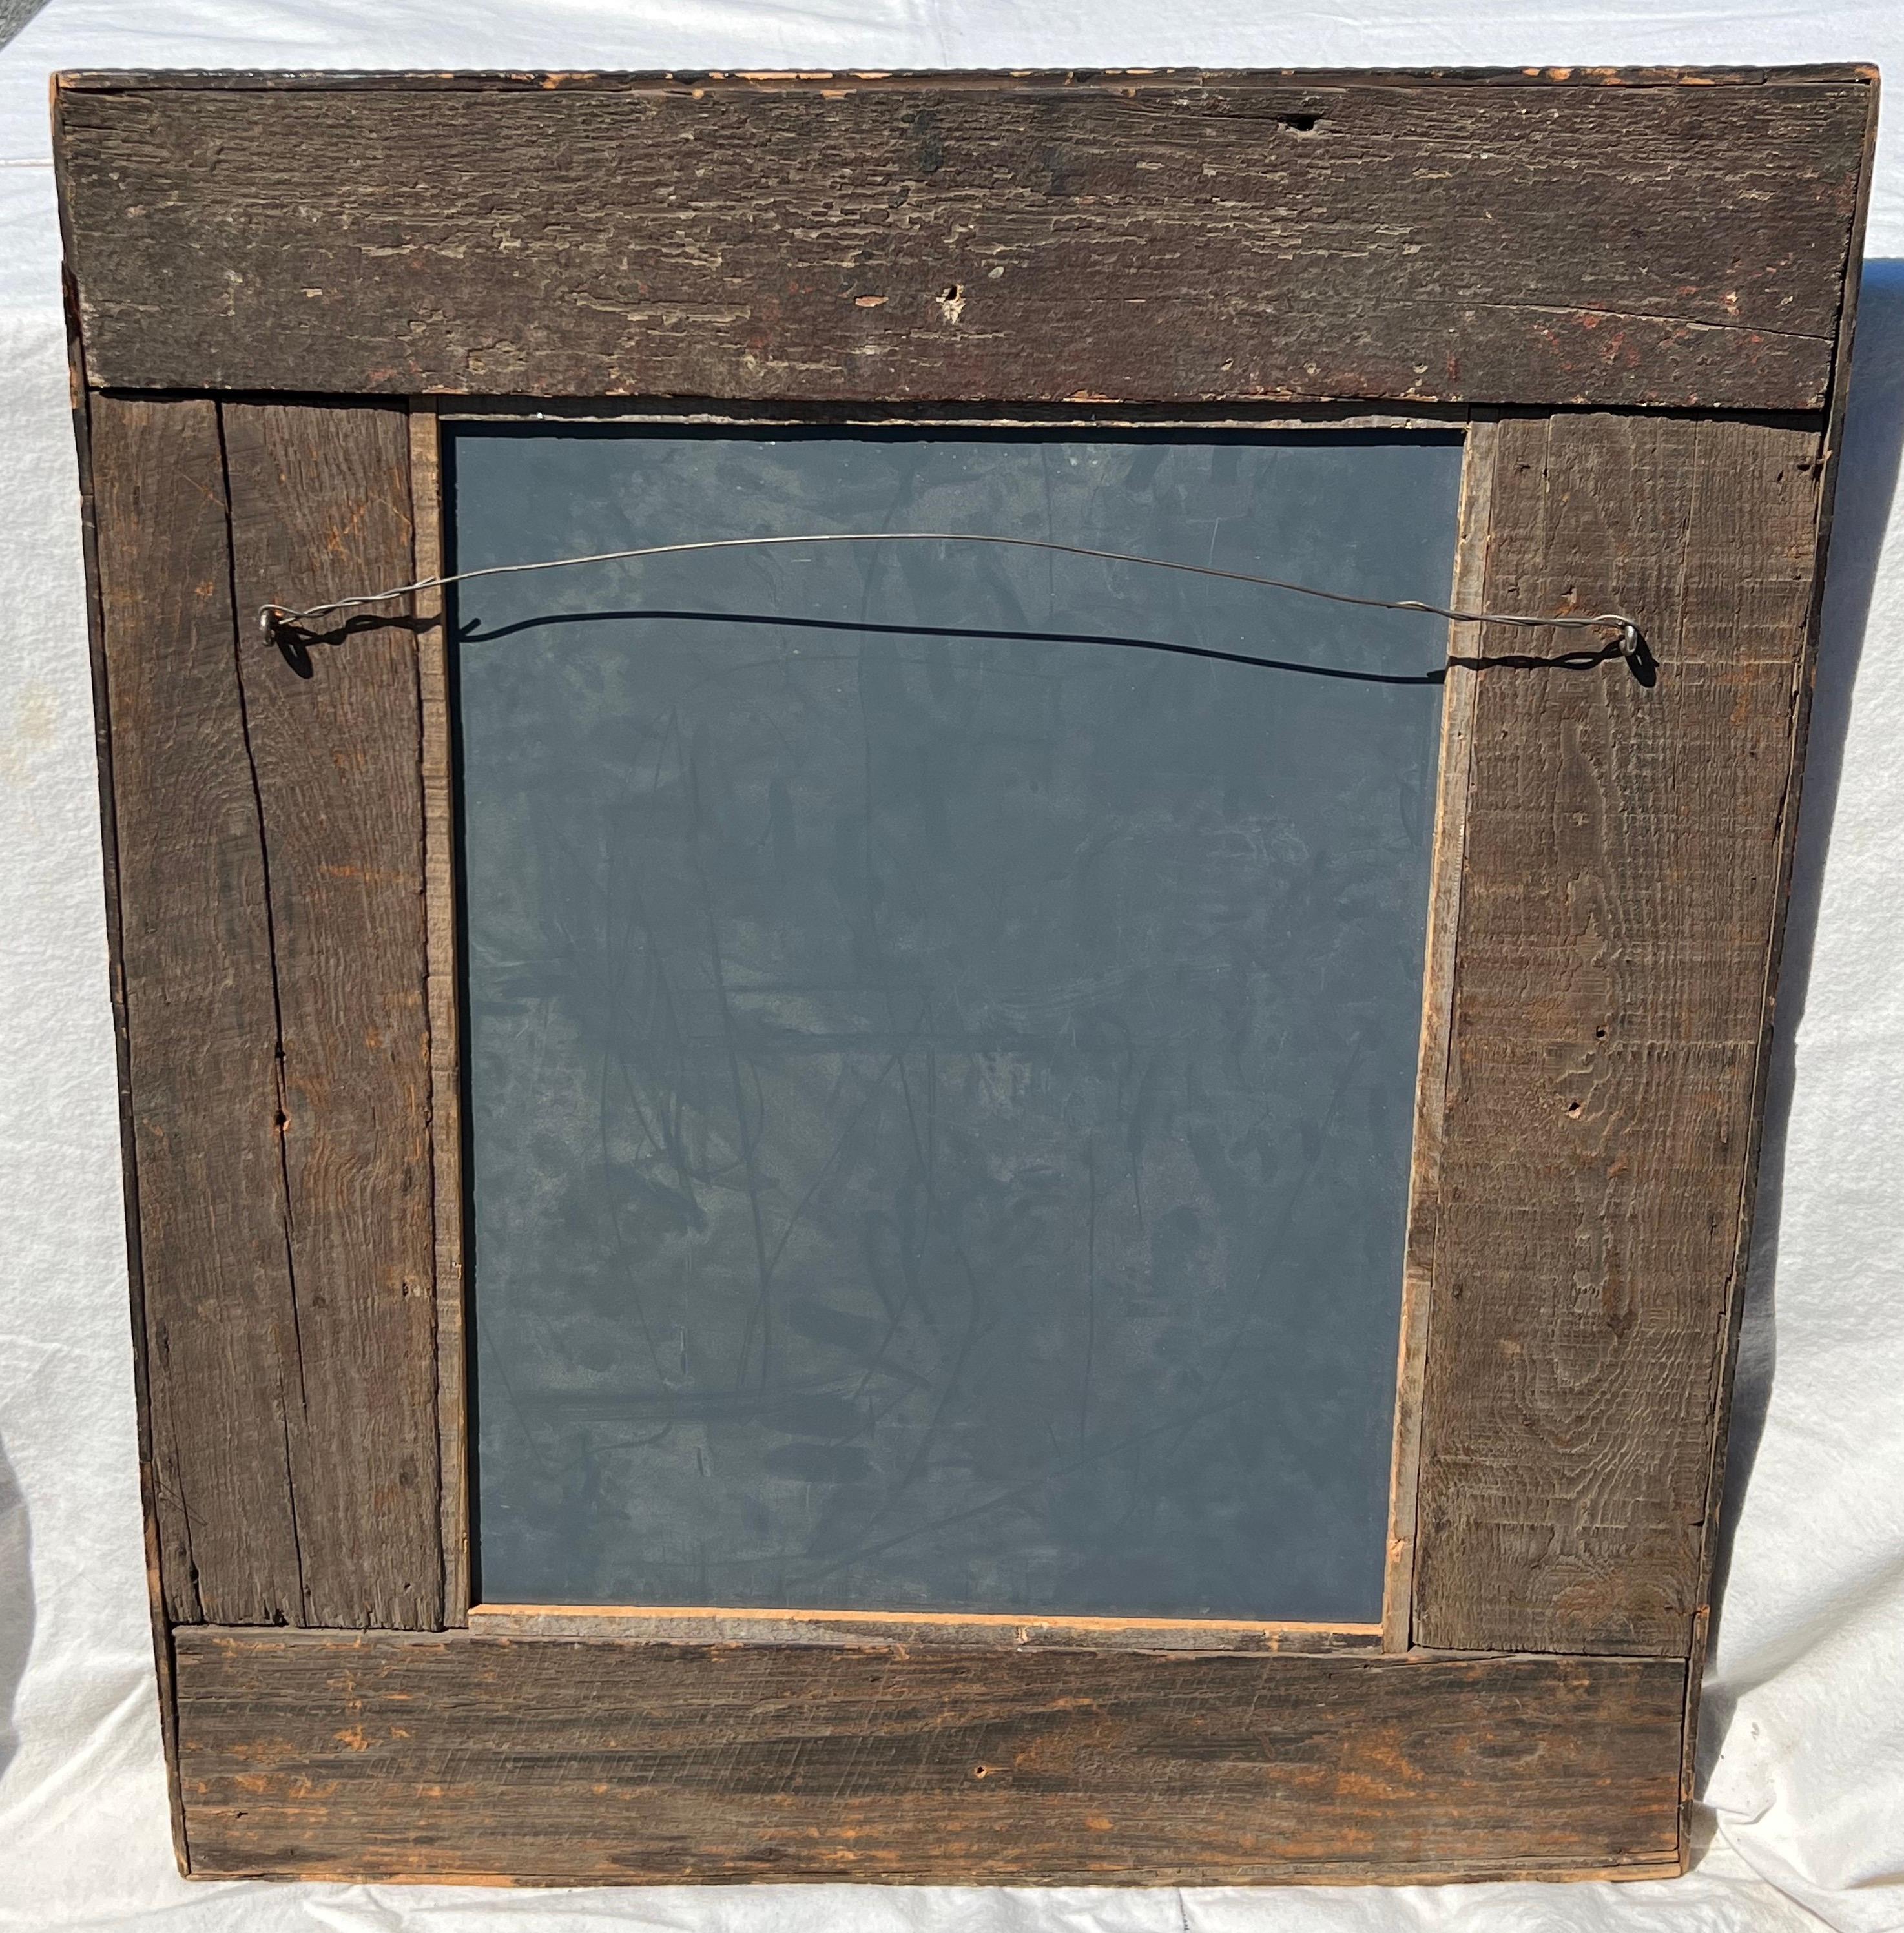 North American 19th Century Tramp Art Frame with Geometric Patterns and Inset Mirror